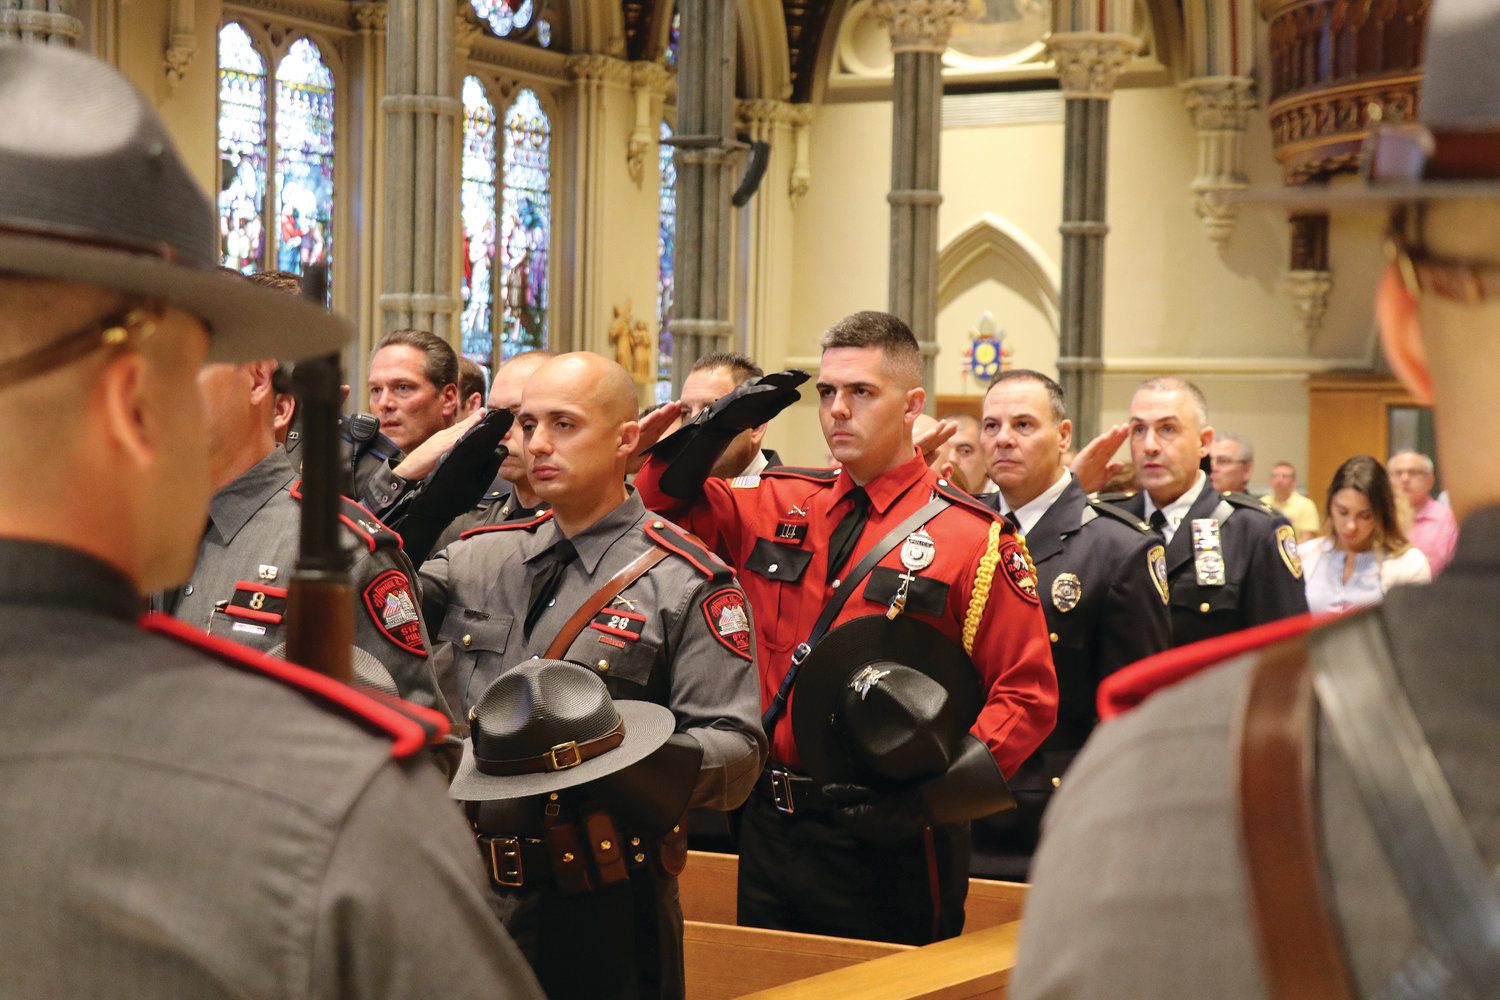 First responders gather for the Public Safety Mass at the Cathedral of SS. Peter & Paul.